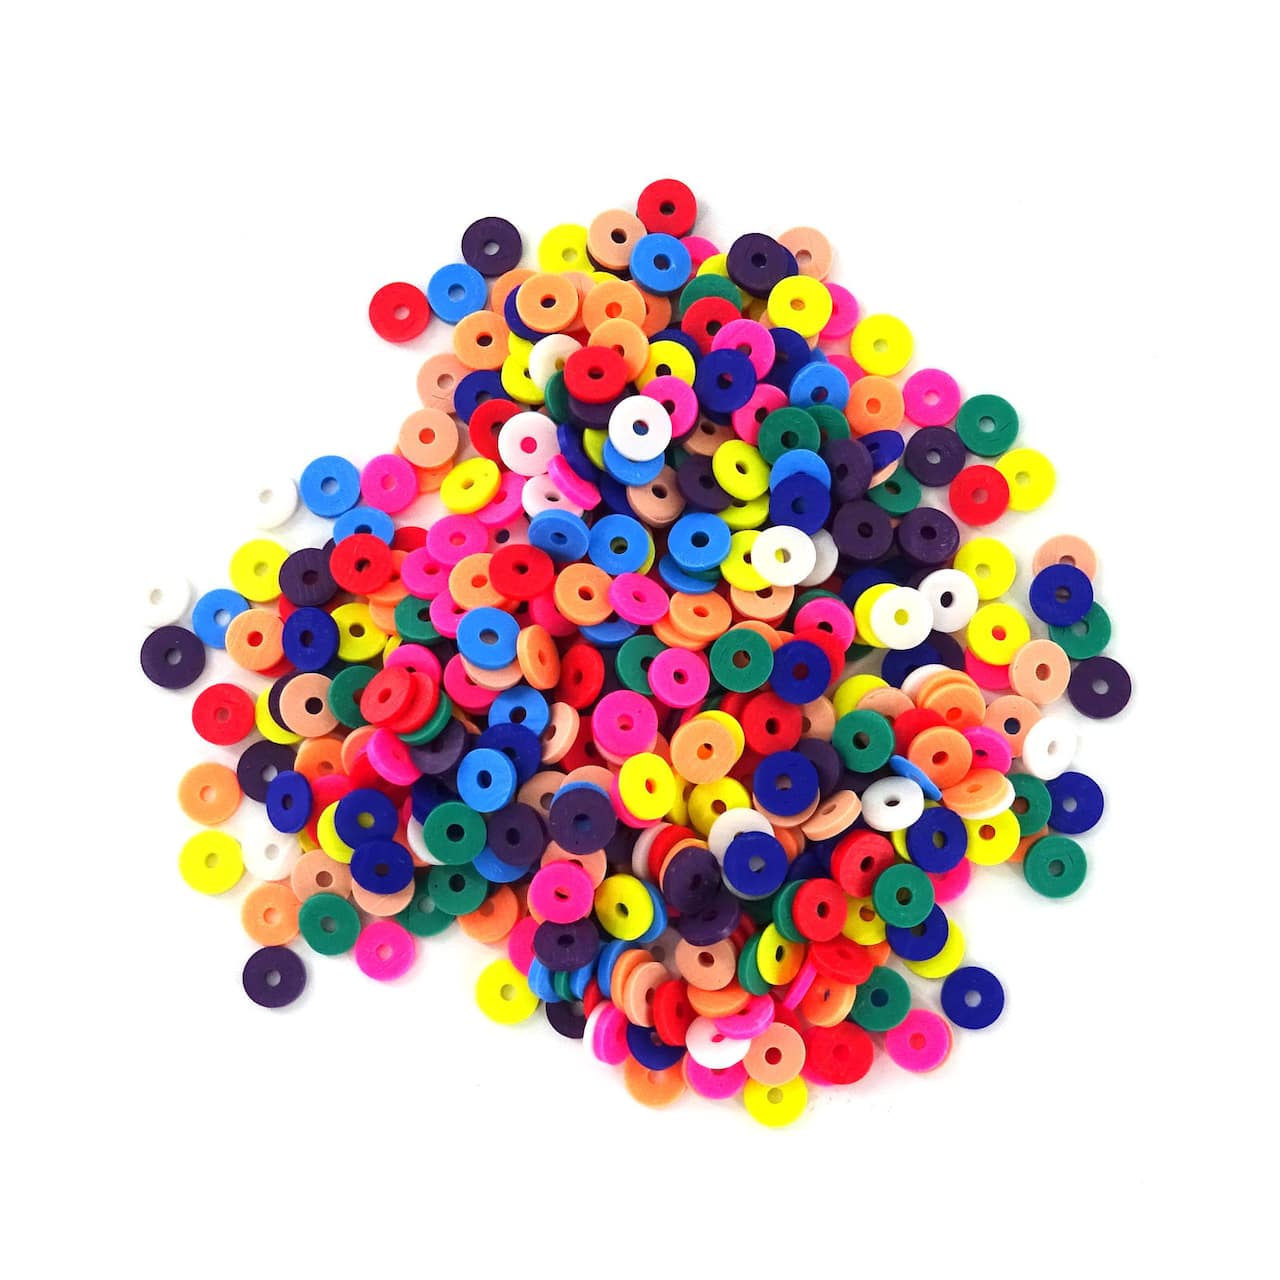 Multicolored Clay Beads by Creatology™